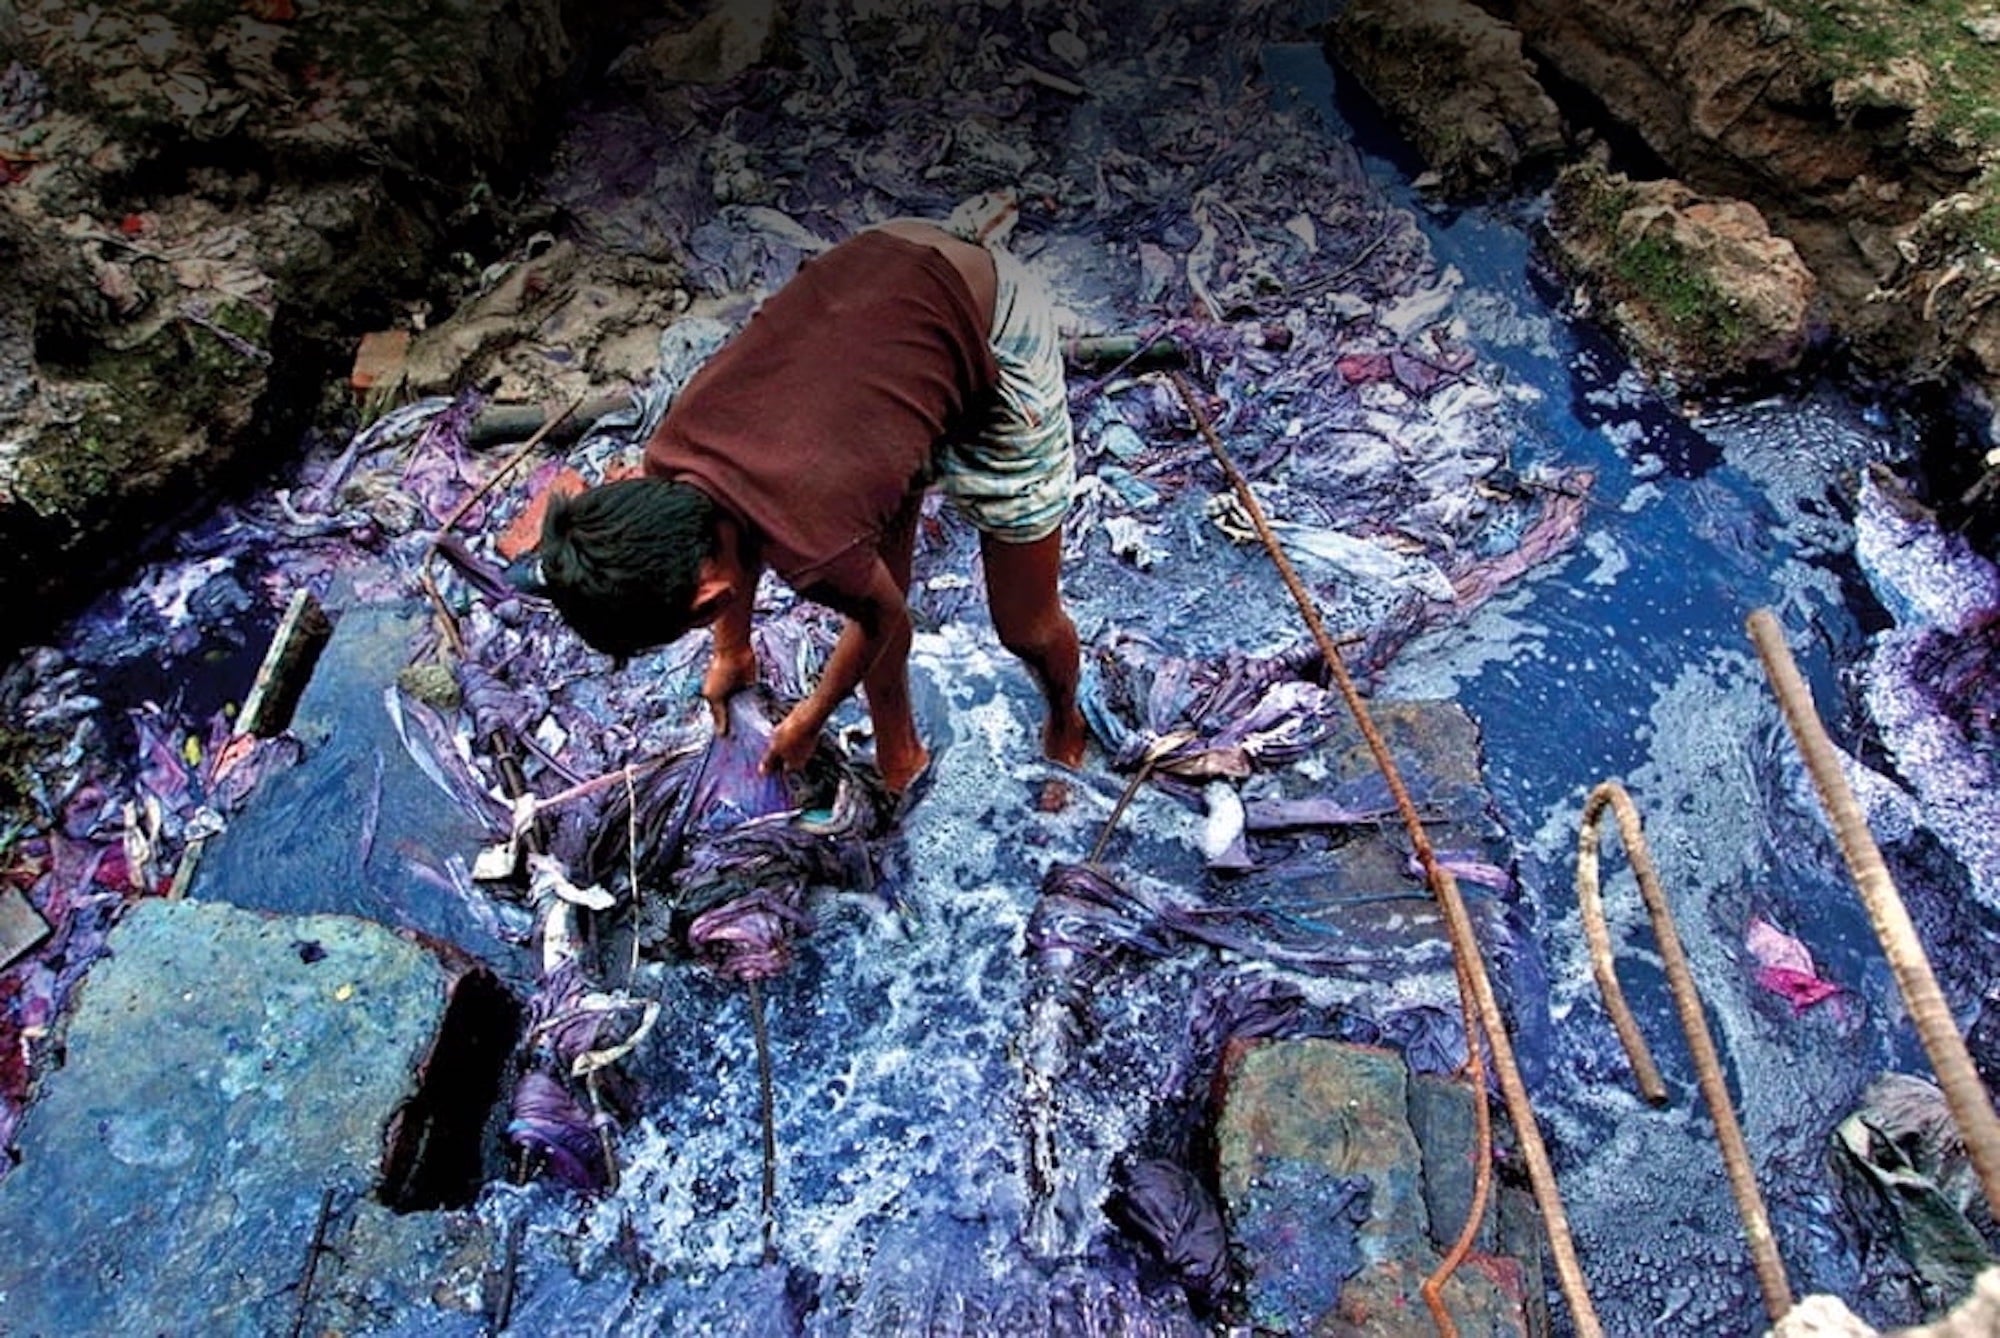 dirty overseas textile pollution